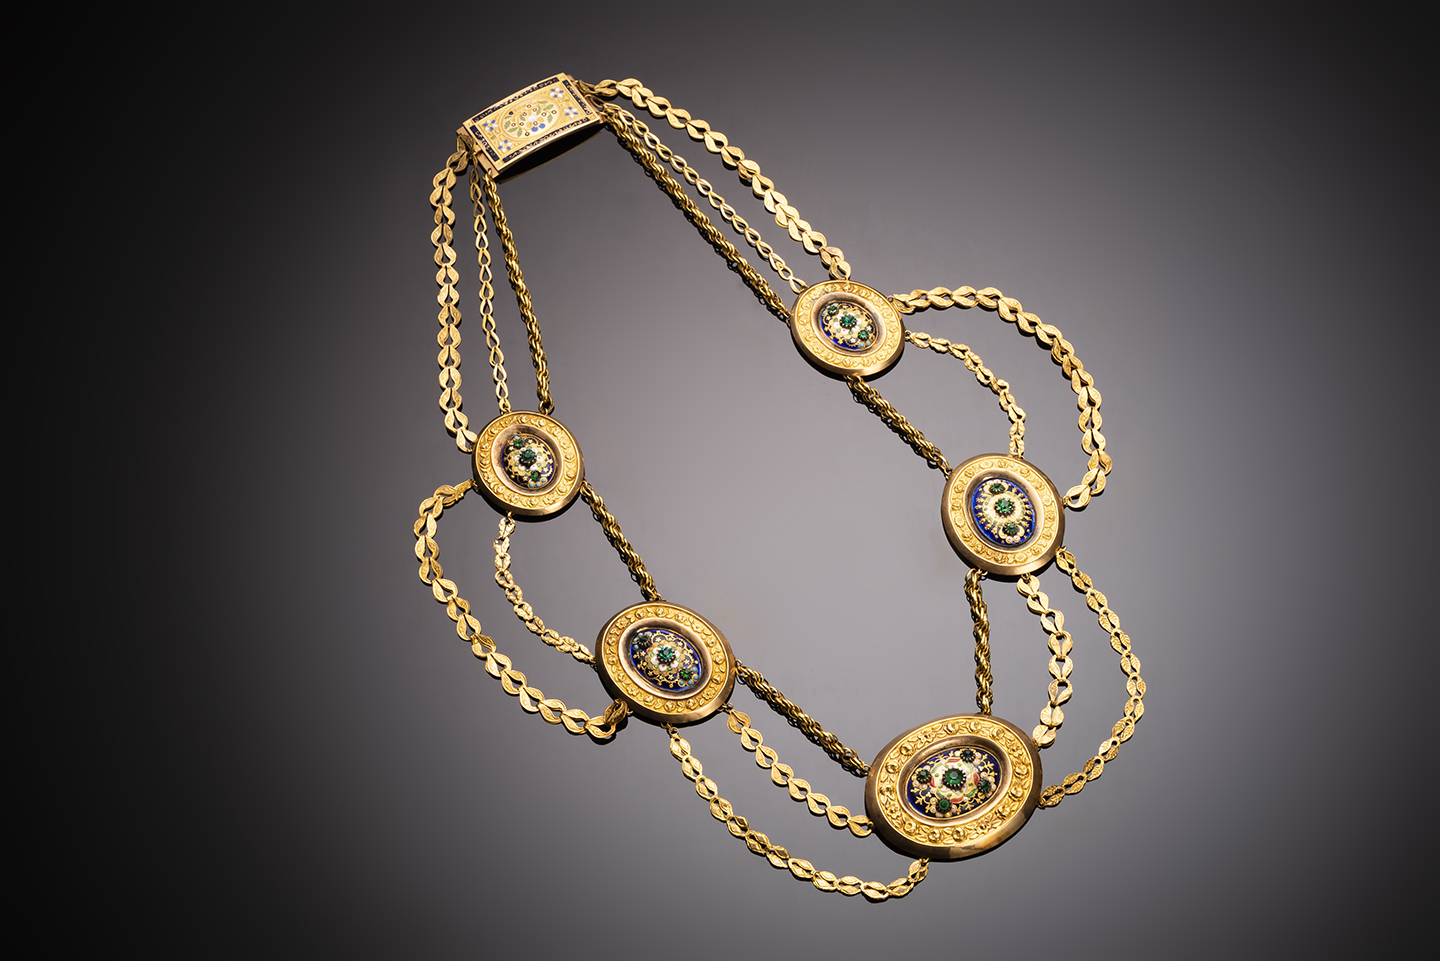 French necklace, early 19th century-1